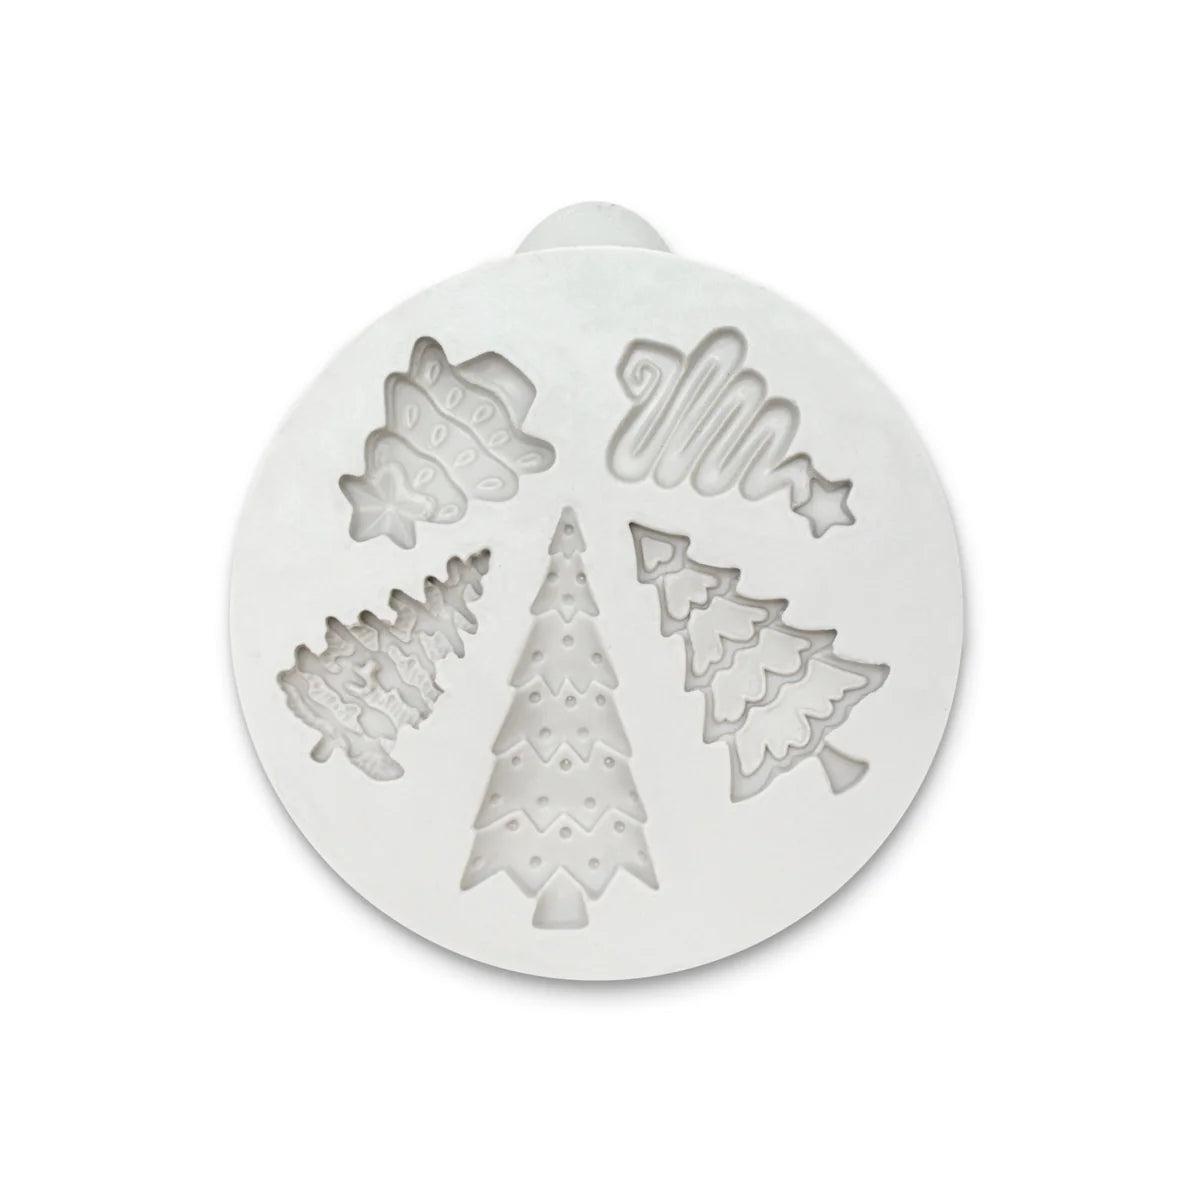 Miniature Christmas Trees Silicone Mould